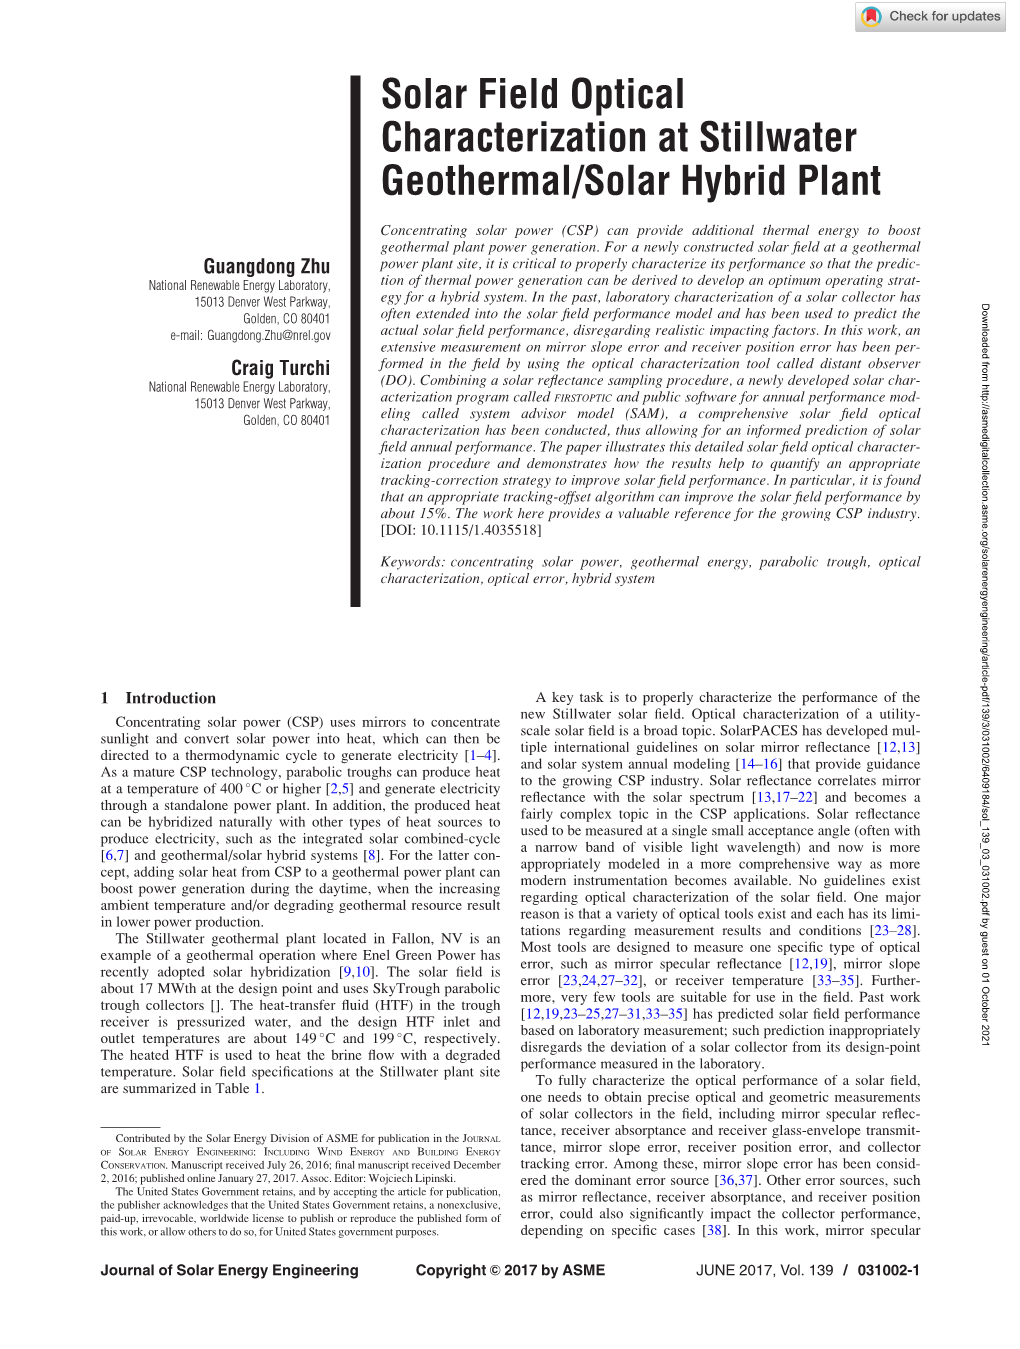 Solar Field Optical Characterization at Stillwater Geothermal/Solar Hybrid Plant